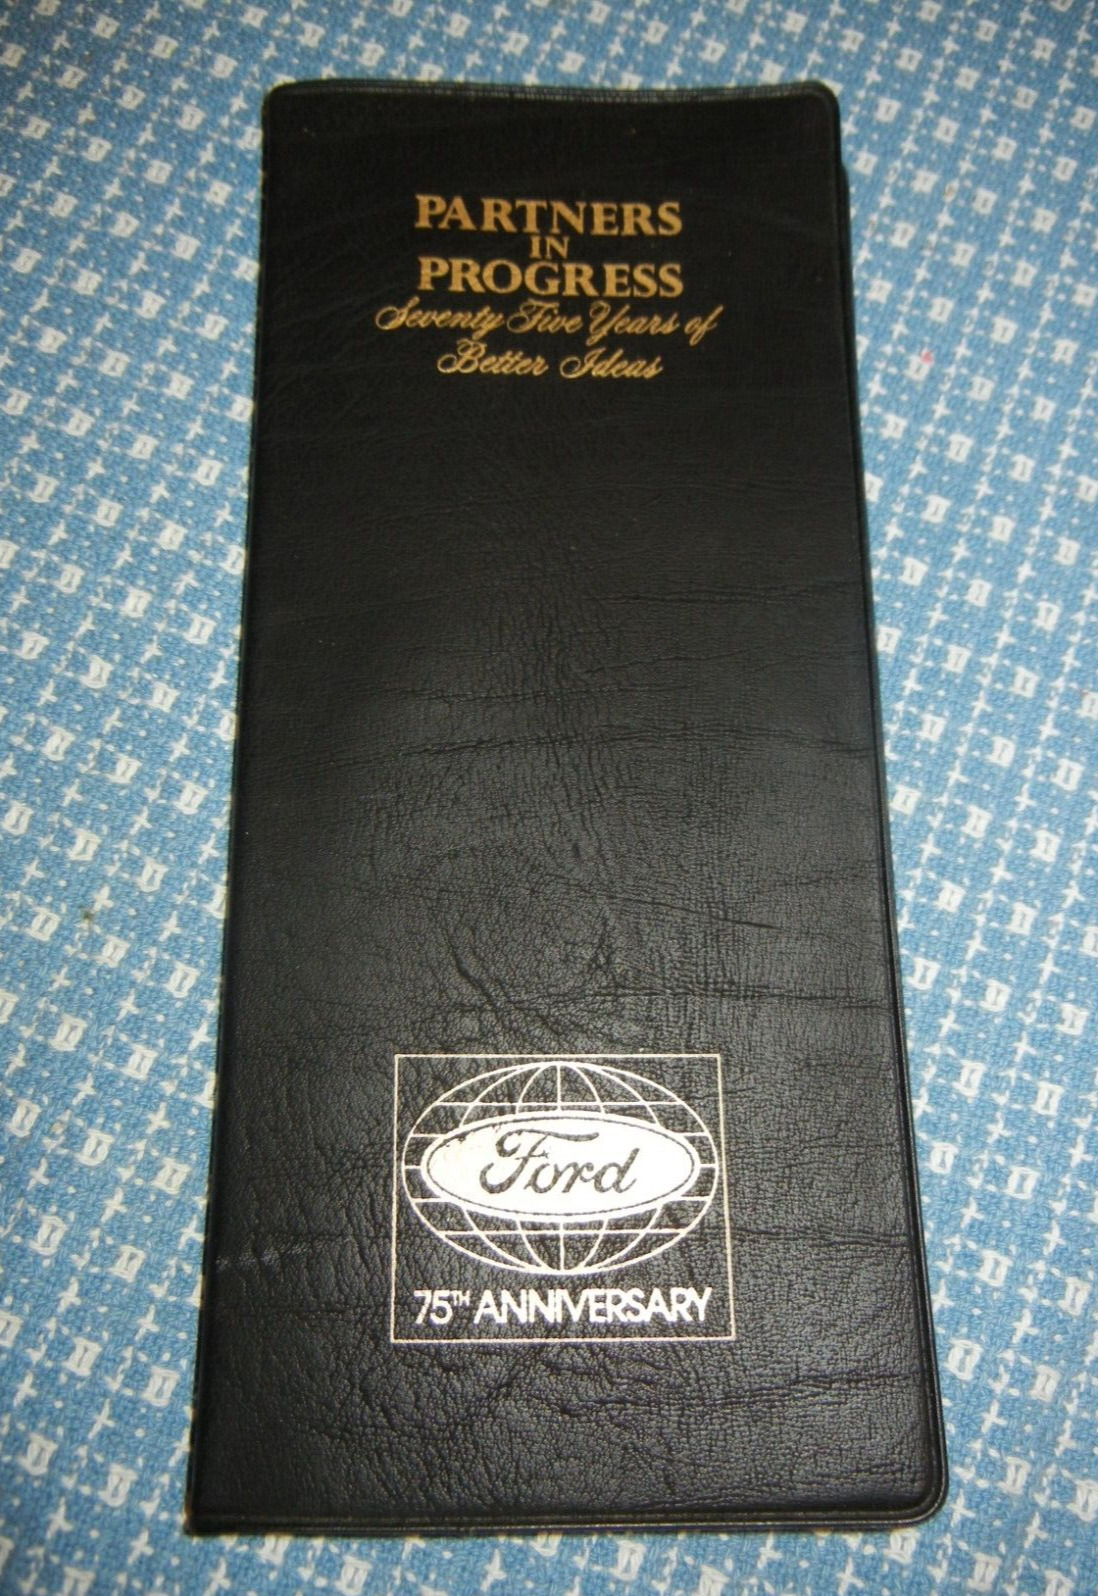 Vintage Ford 75th Anniversary Business Card Booklet